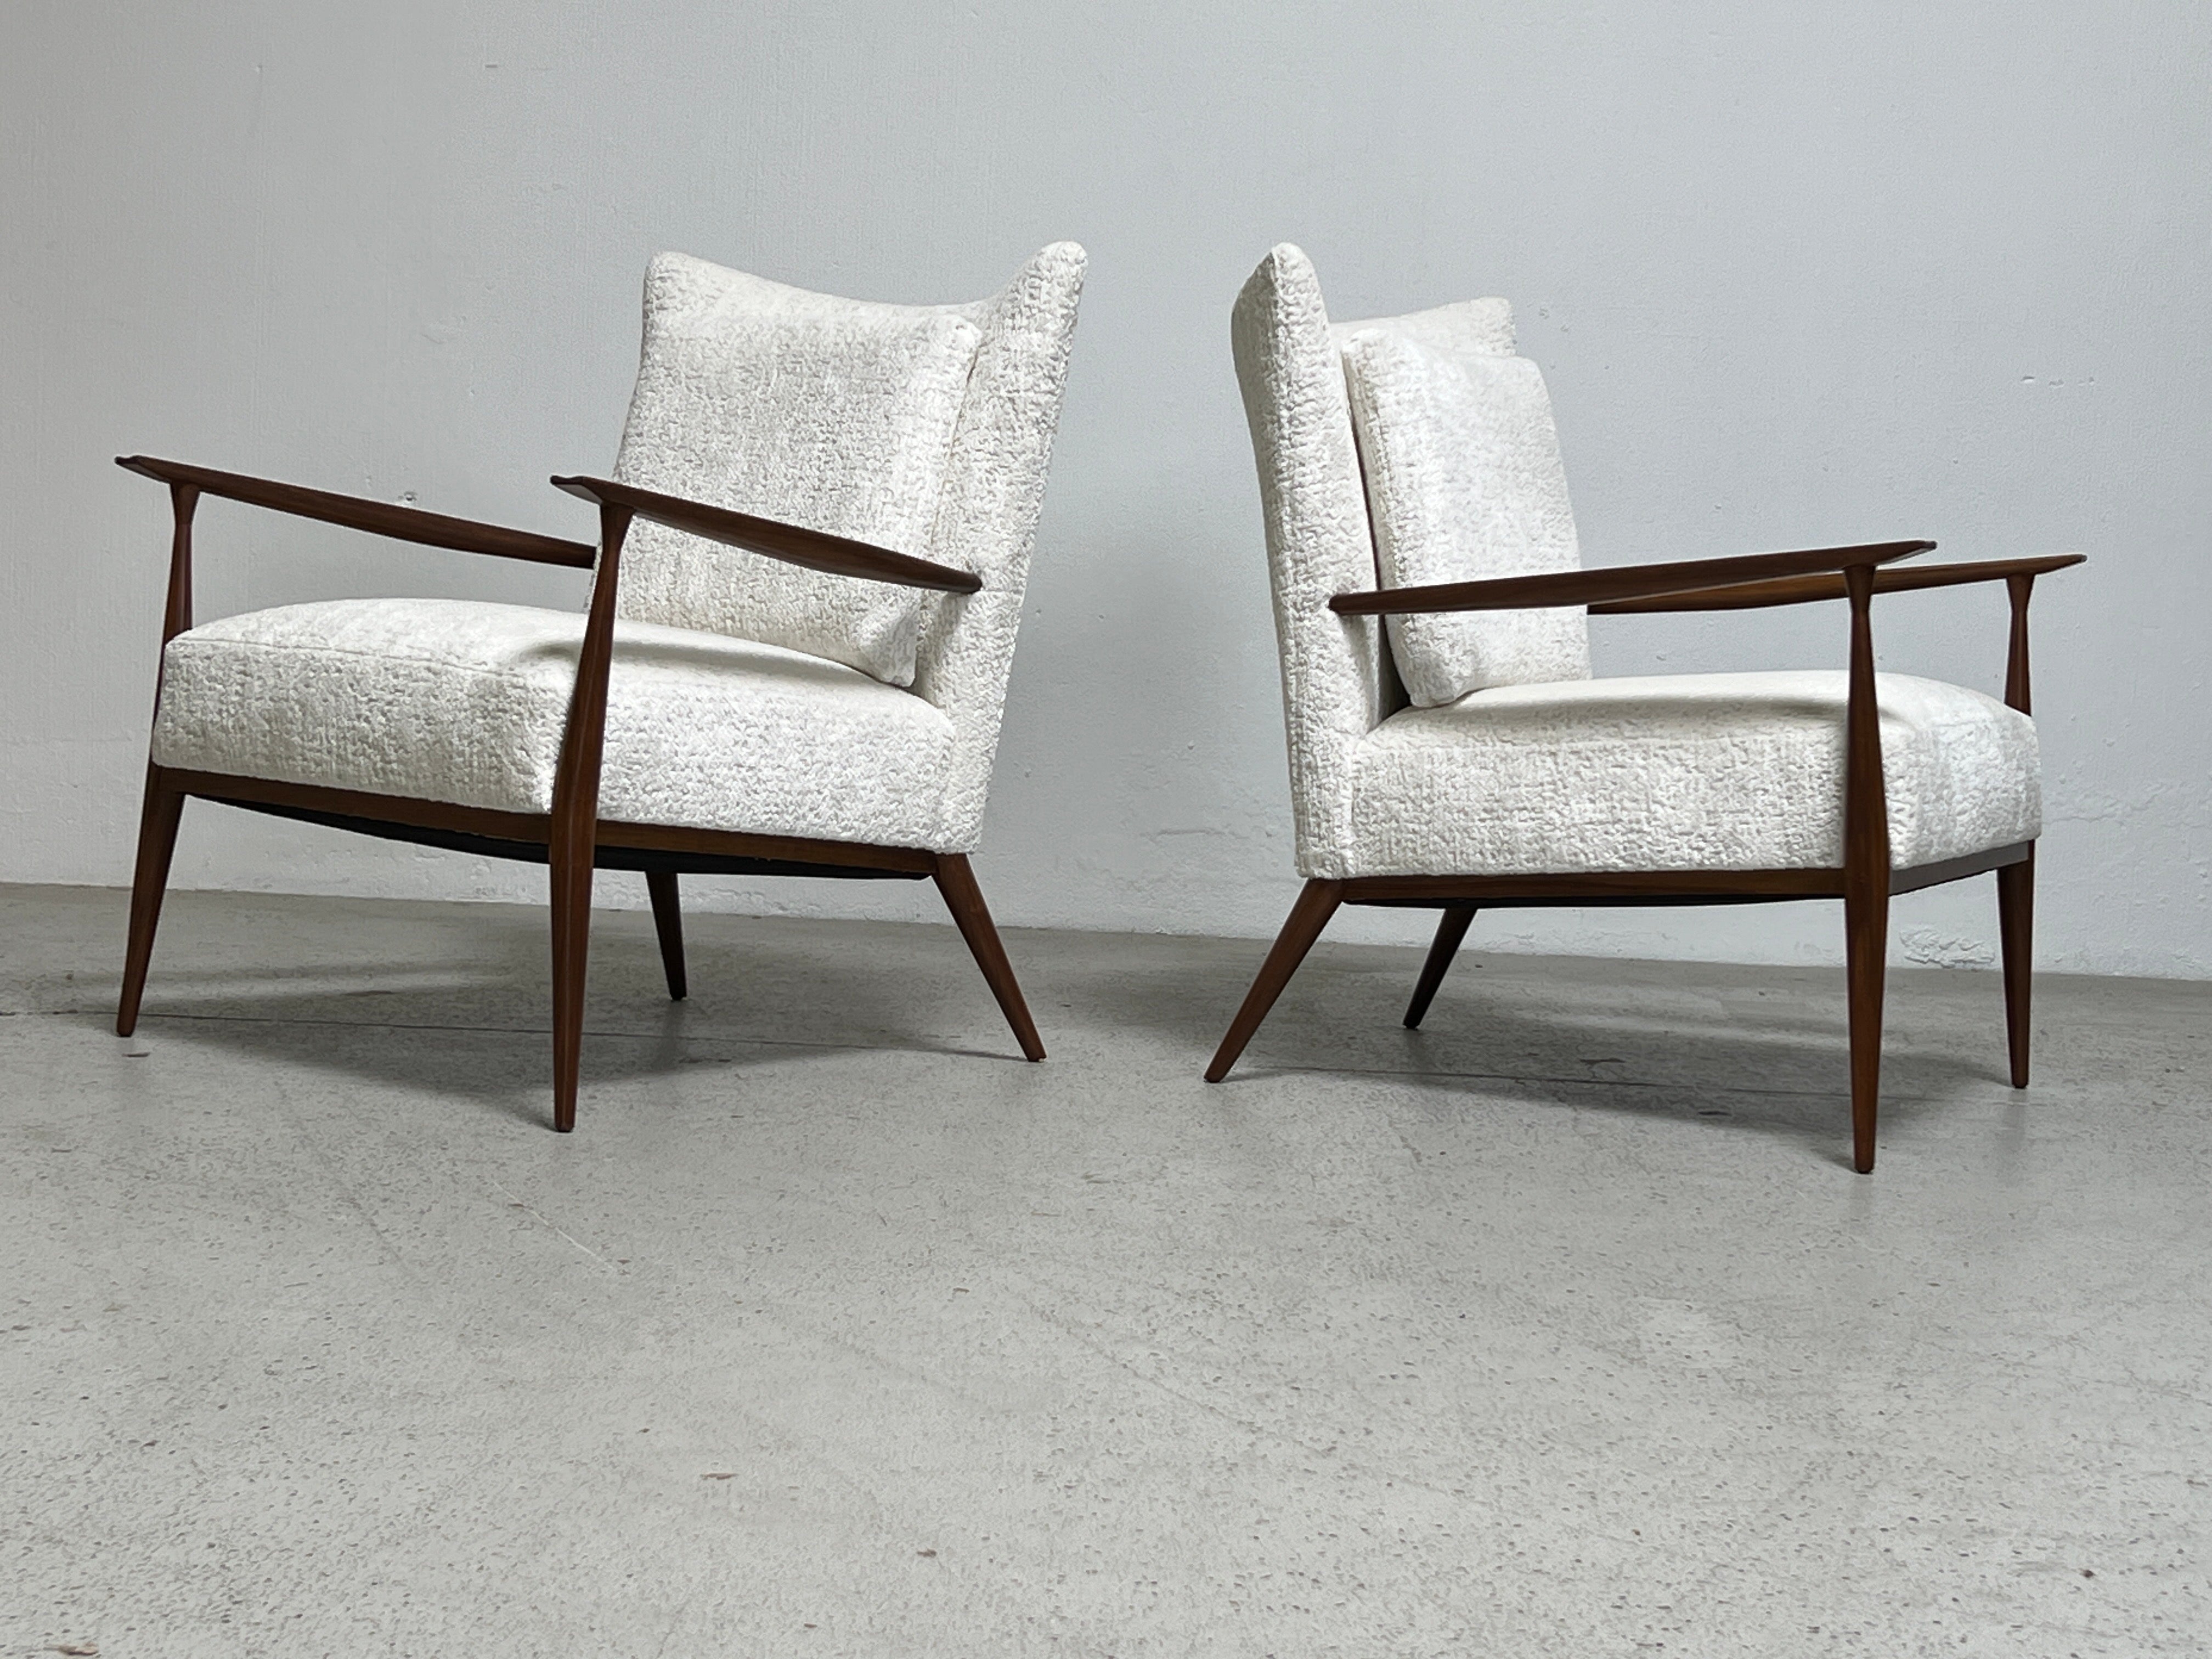 A pair of walnut lounge chairs designed by Paul McCobb. Fully restored and upholstered in Holly Hunt / Plushy / Soft Light.